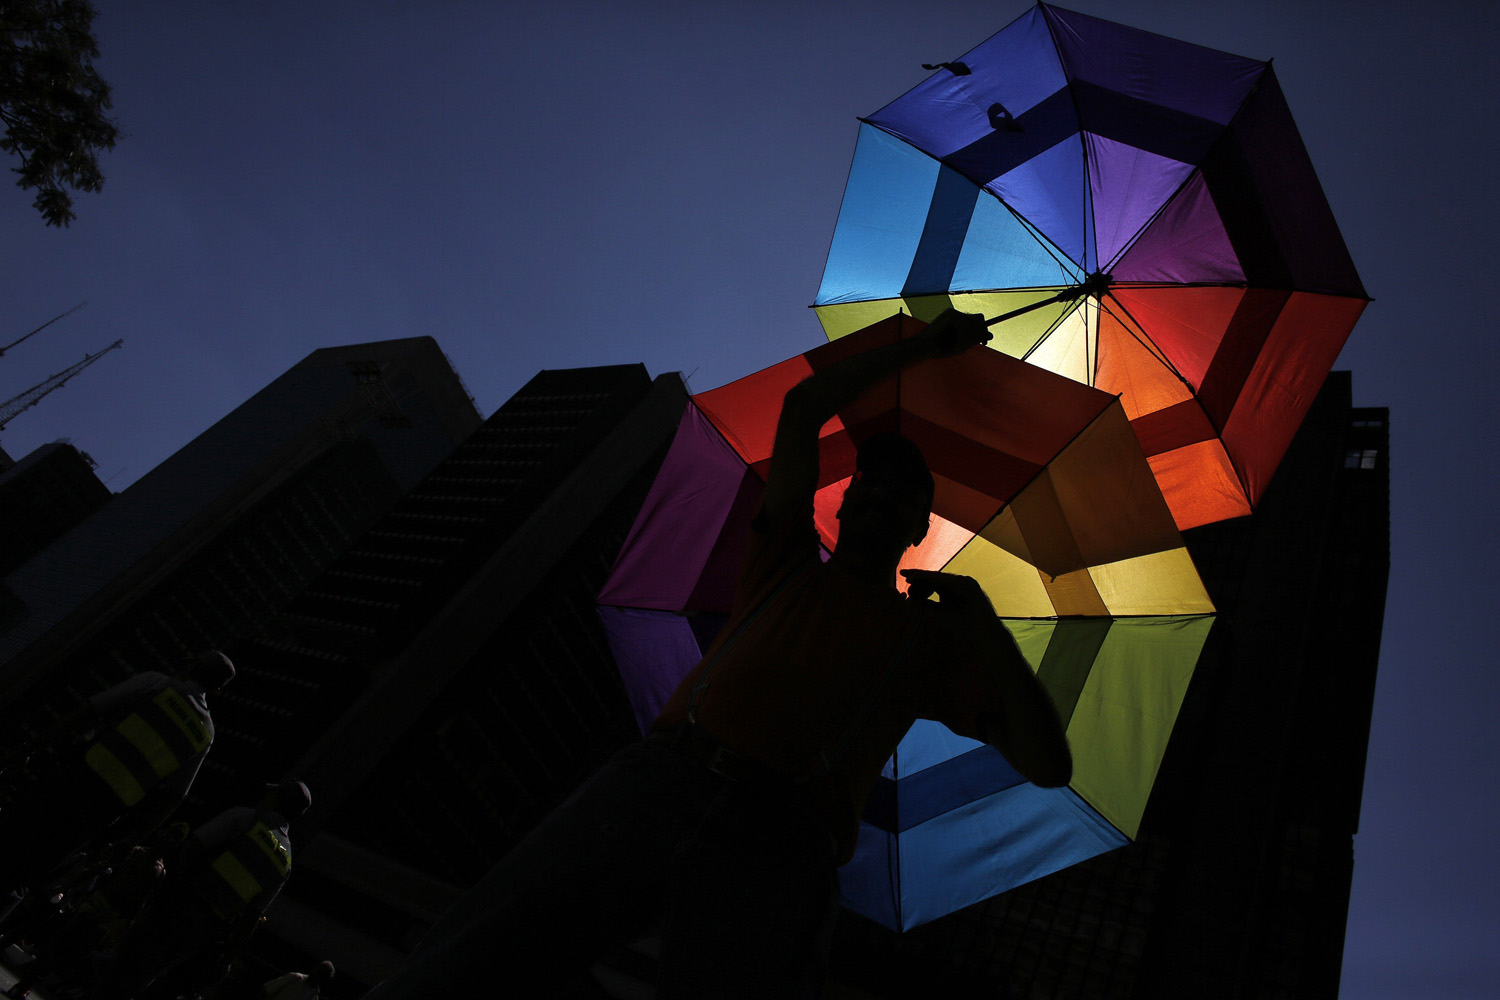 A reveller holds up rainbow coloured umbrellas during the 18th Gay Pride Parade in Avenida Paulista in Sao Paulo